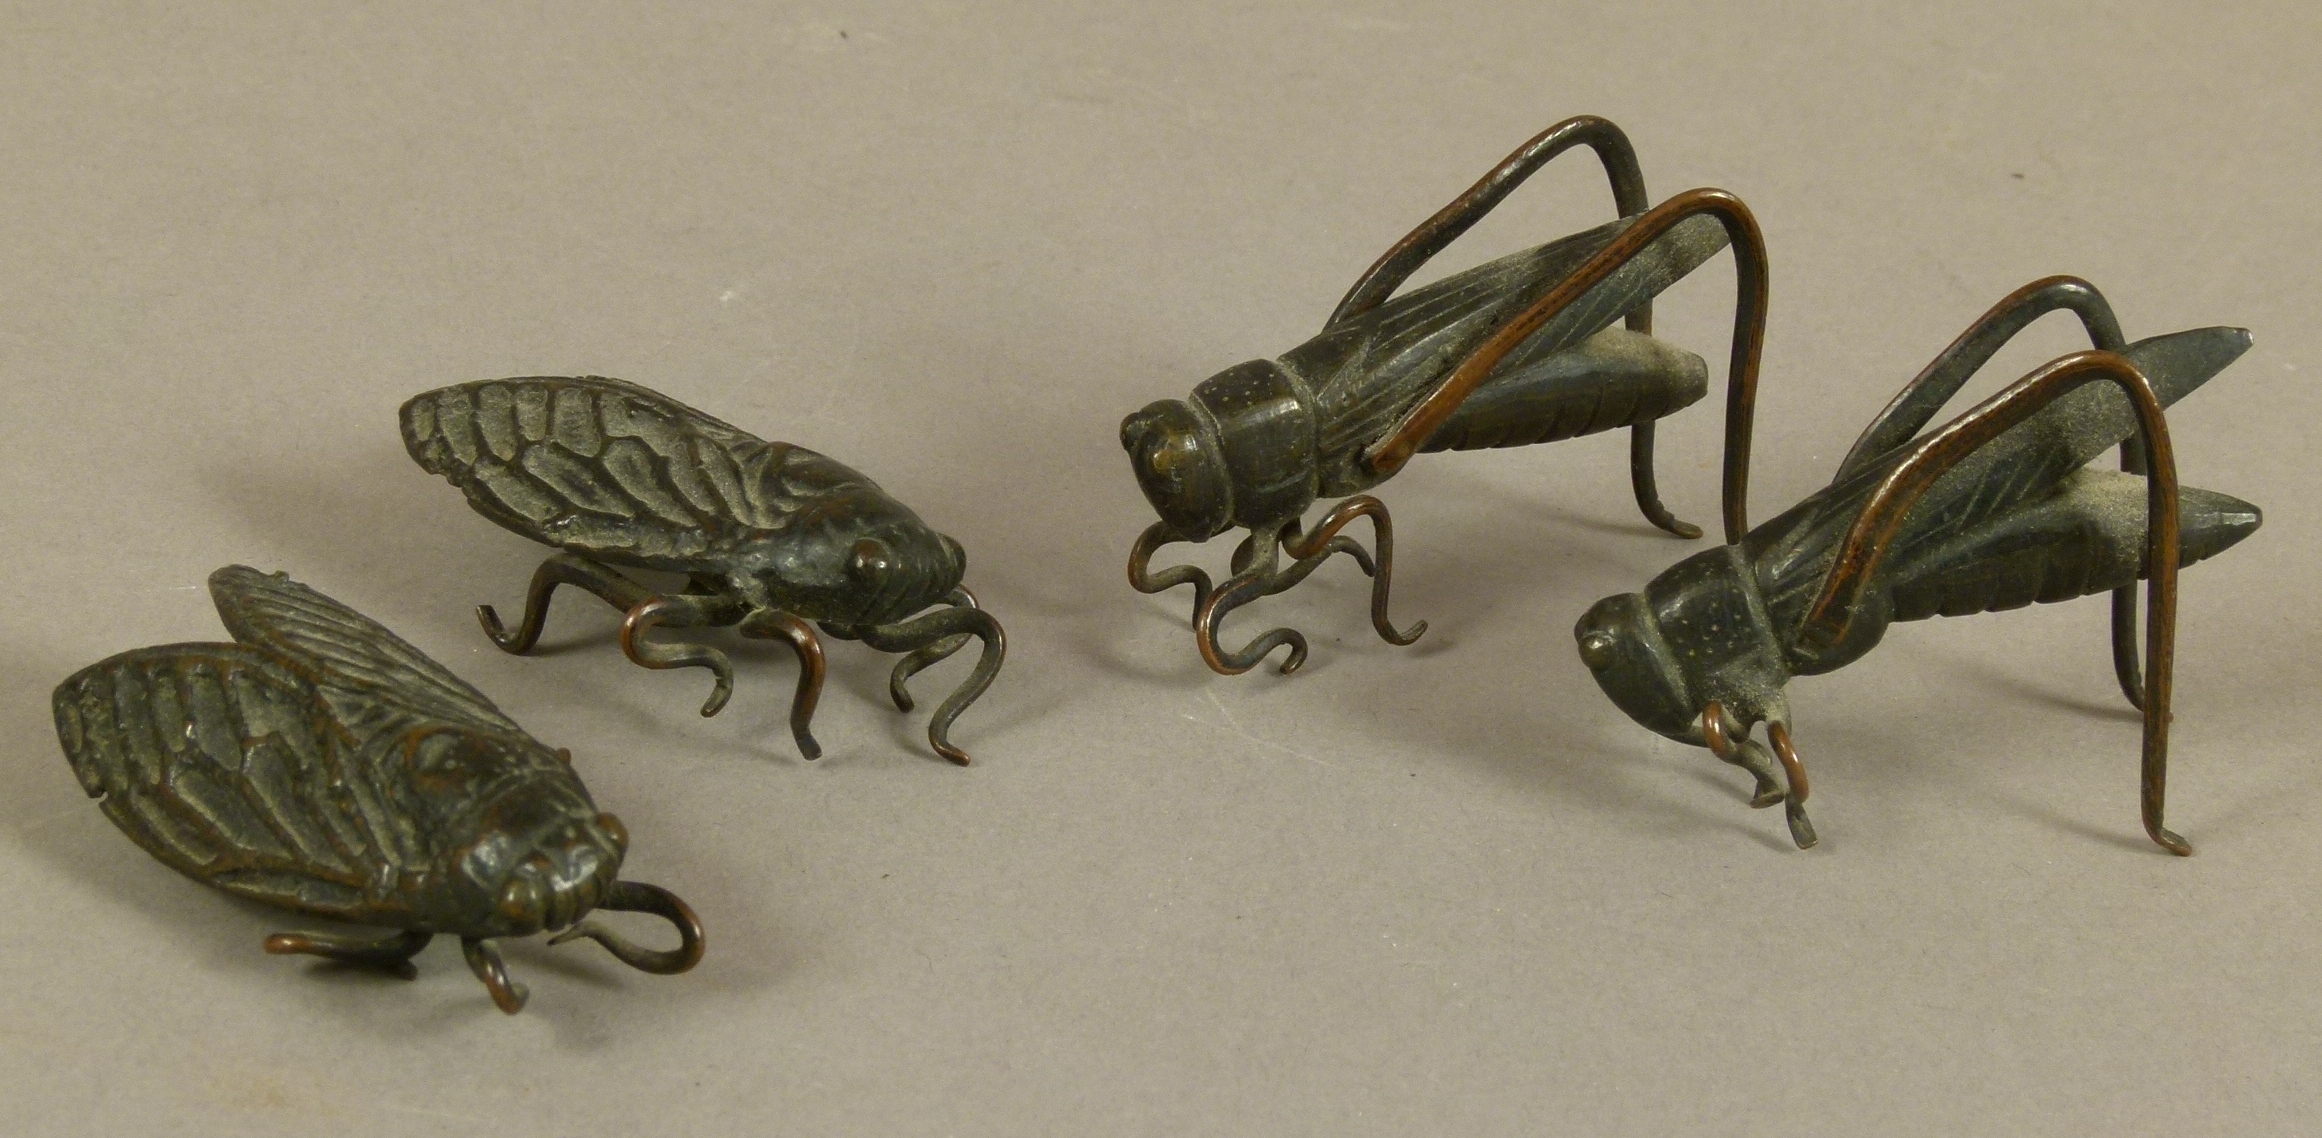 FOUR JAPANESE BRONZE INSECTS, Meiji period including two crickets and two cicadas, 5cm wide and